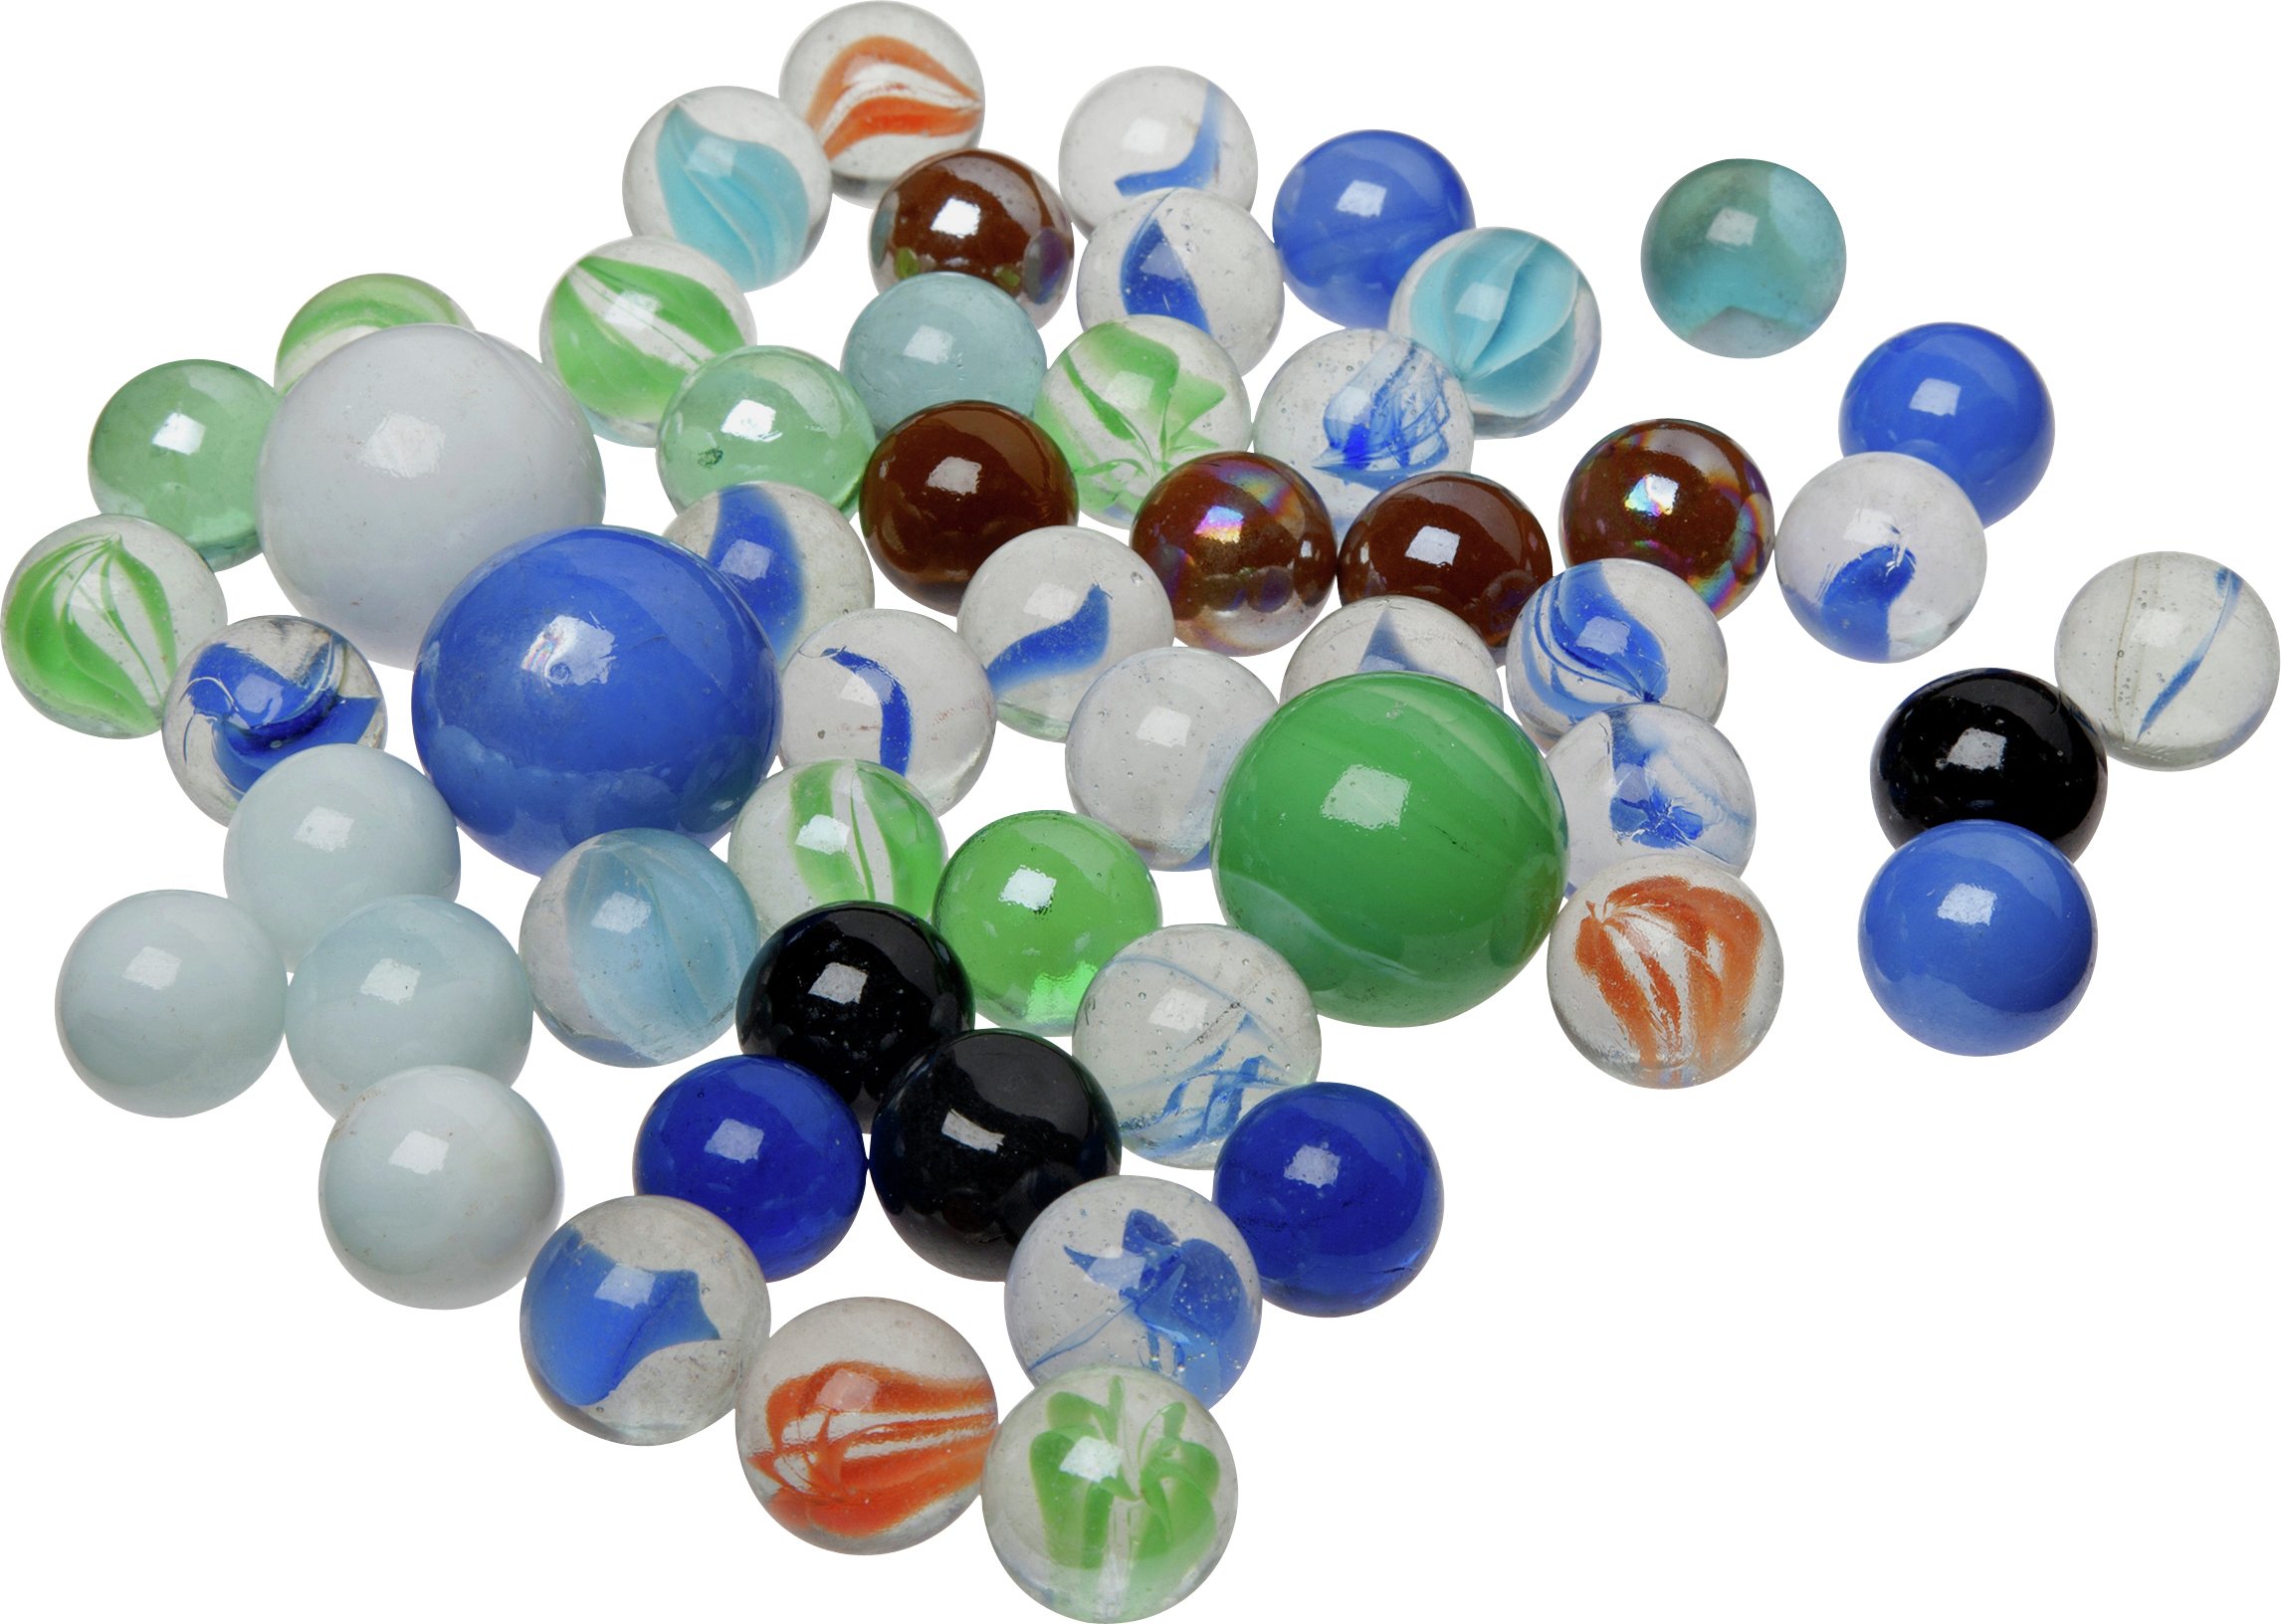 Marble Bags Party Fillers - Pack of 8. Review